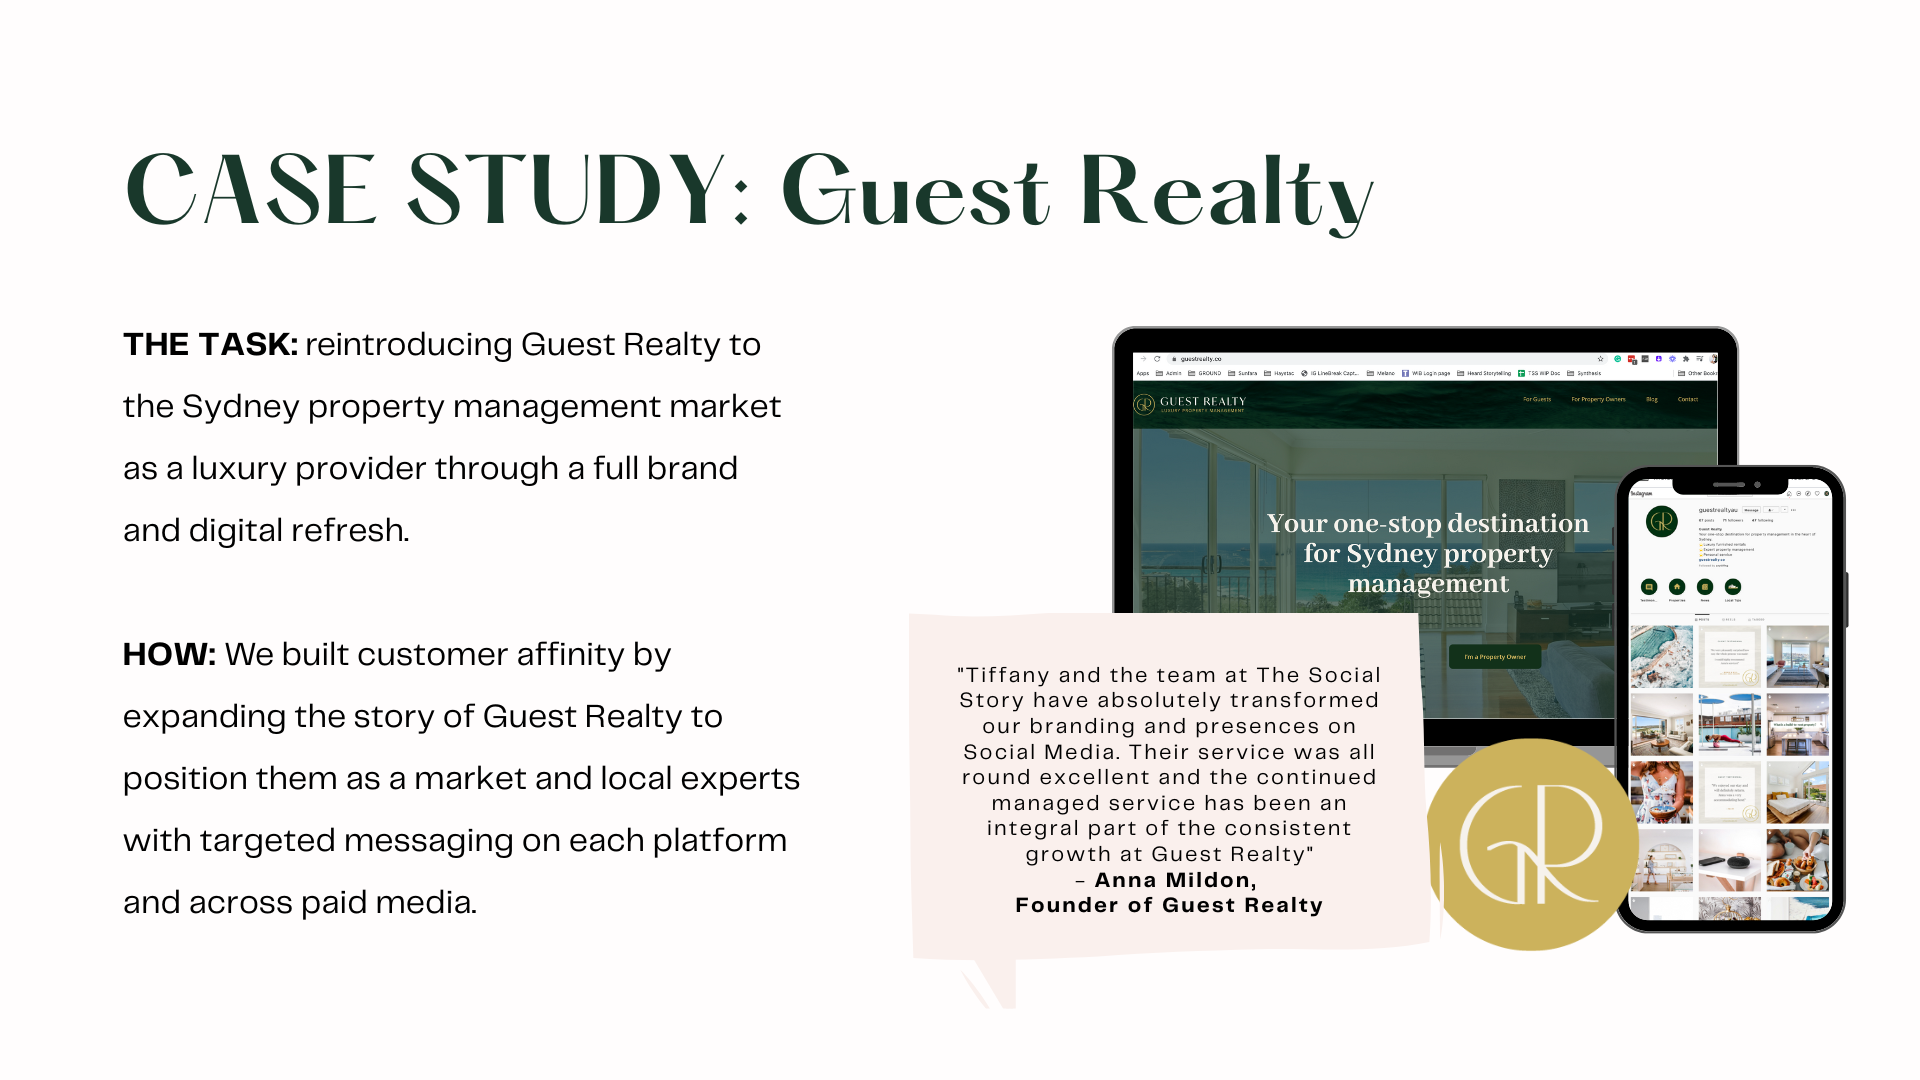 The Social Story Case Study - Guest Realty